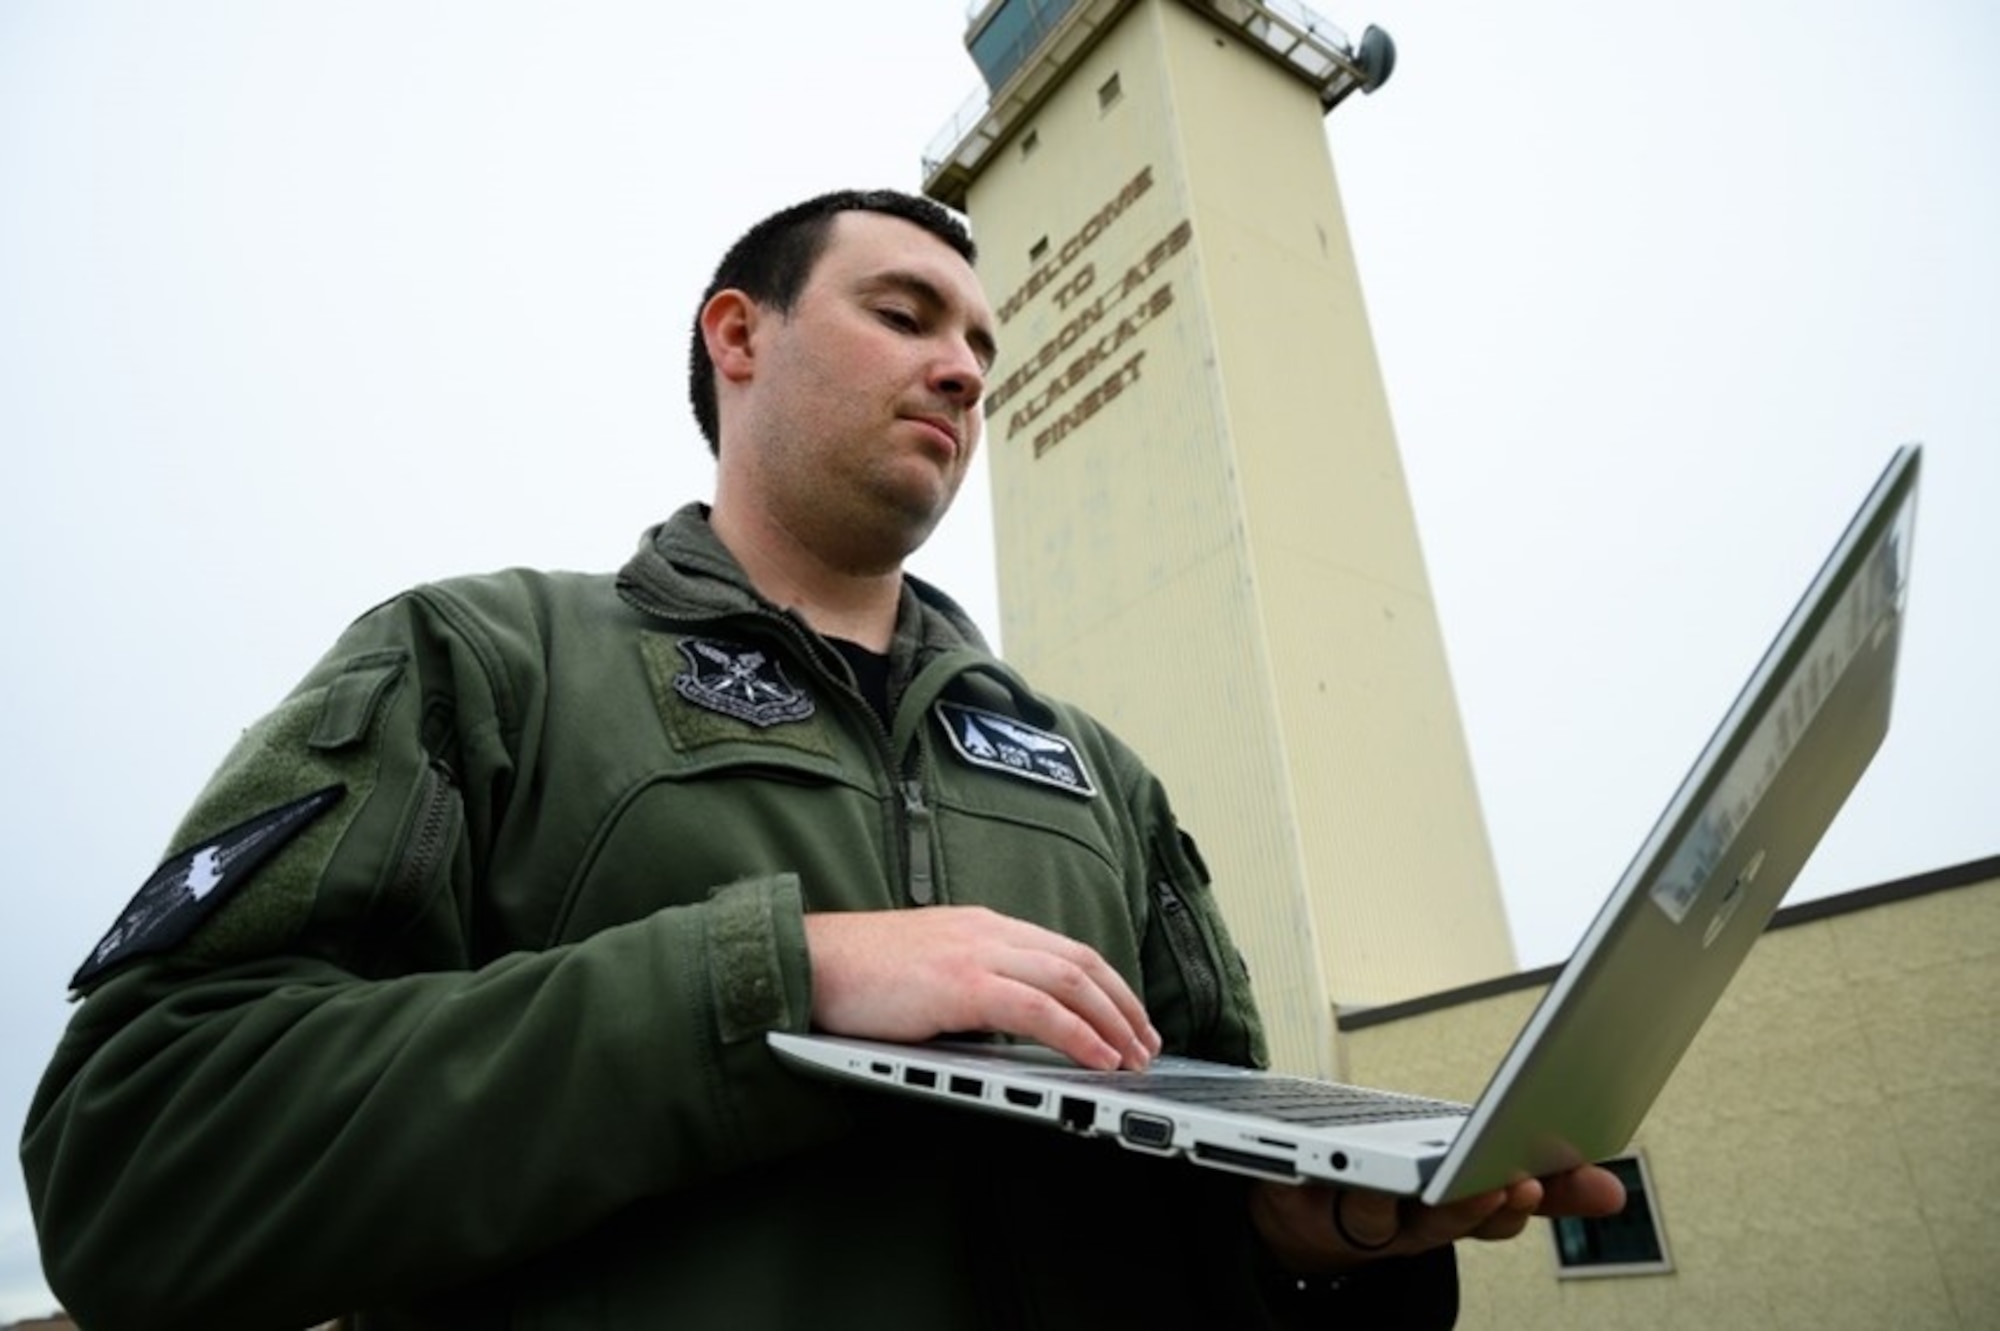 U.S. Air Force Capt. Ryan Gorski, a 9th Bomb Squadron B-1 pilot, sets up a communications flyaway kit on Eielson Air Force Base, Alaska, Sept. 9, 2022. The communications flyaway kit utilizes SpaceX’s Starlink service which provides commercial internet and connectivity to support bomber task force missions at austere locations. (U.S. Air Force photo by Senior Airman Jose Miguel T. Tamondong)